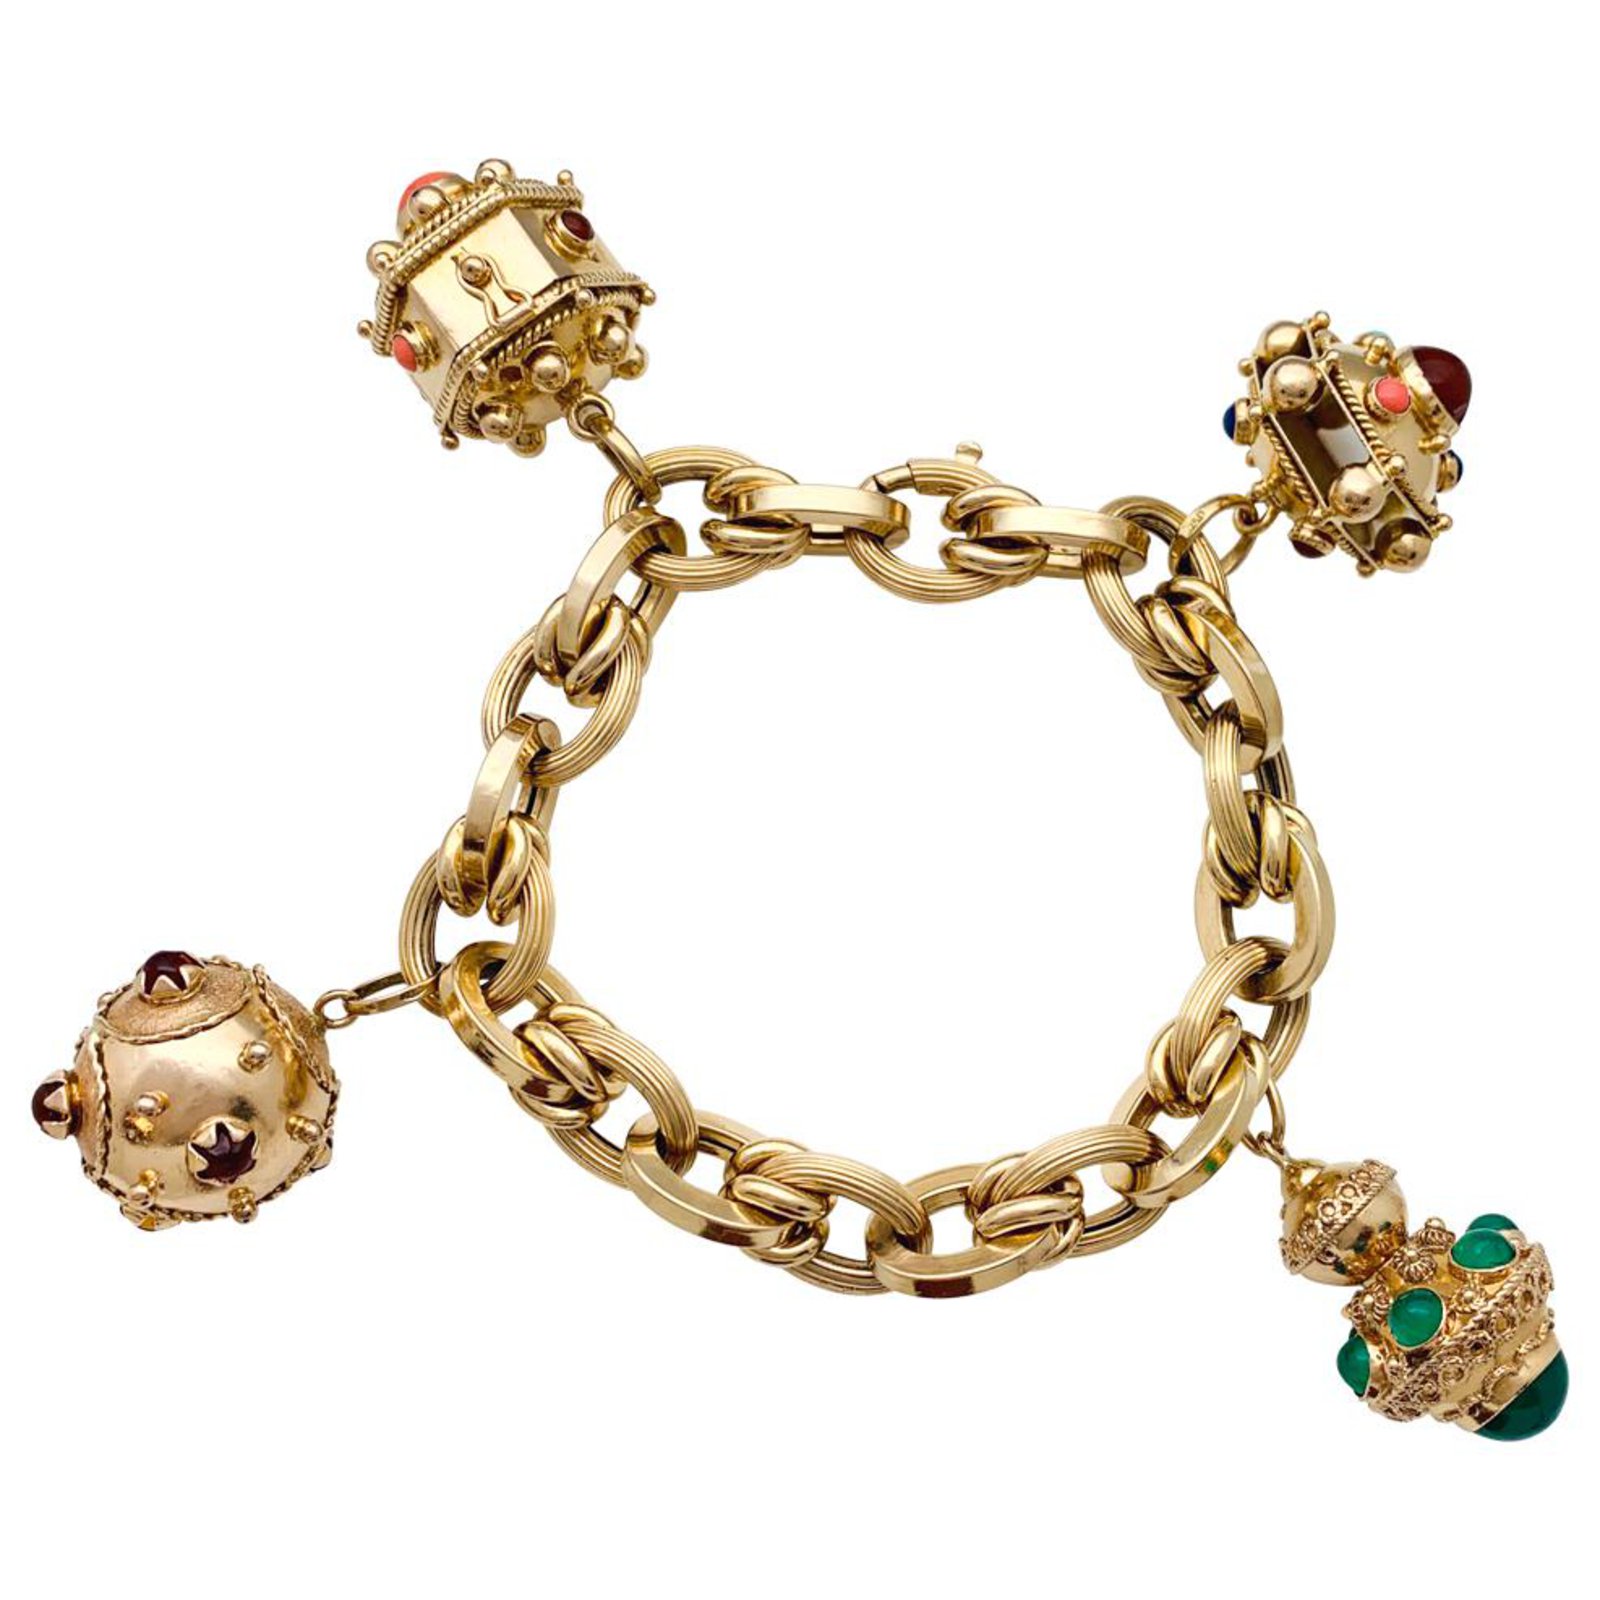 Yellow gold charm bracelet with colored glasses.